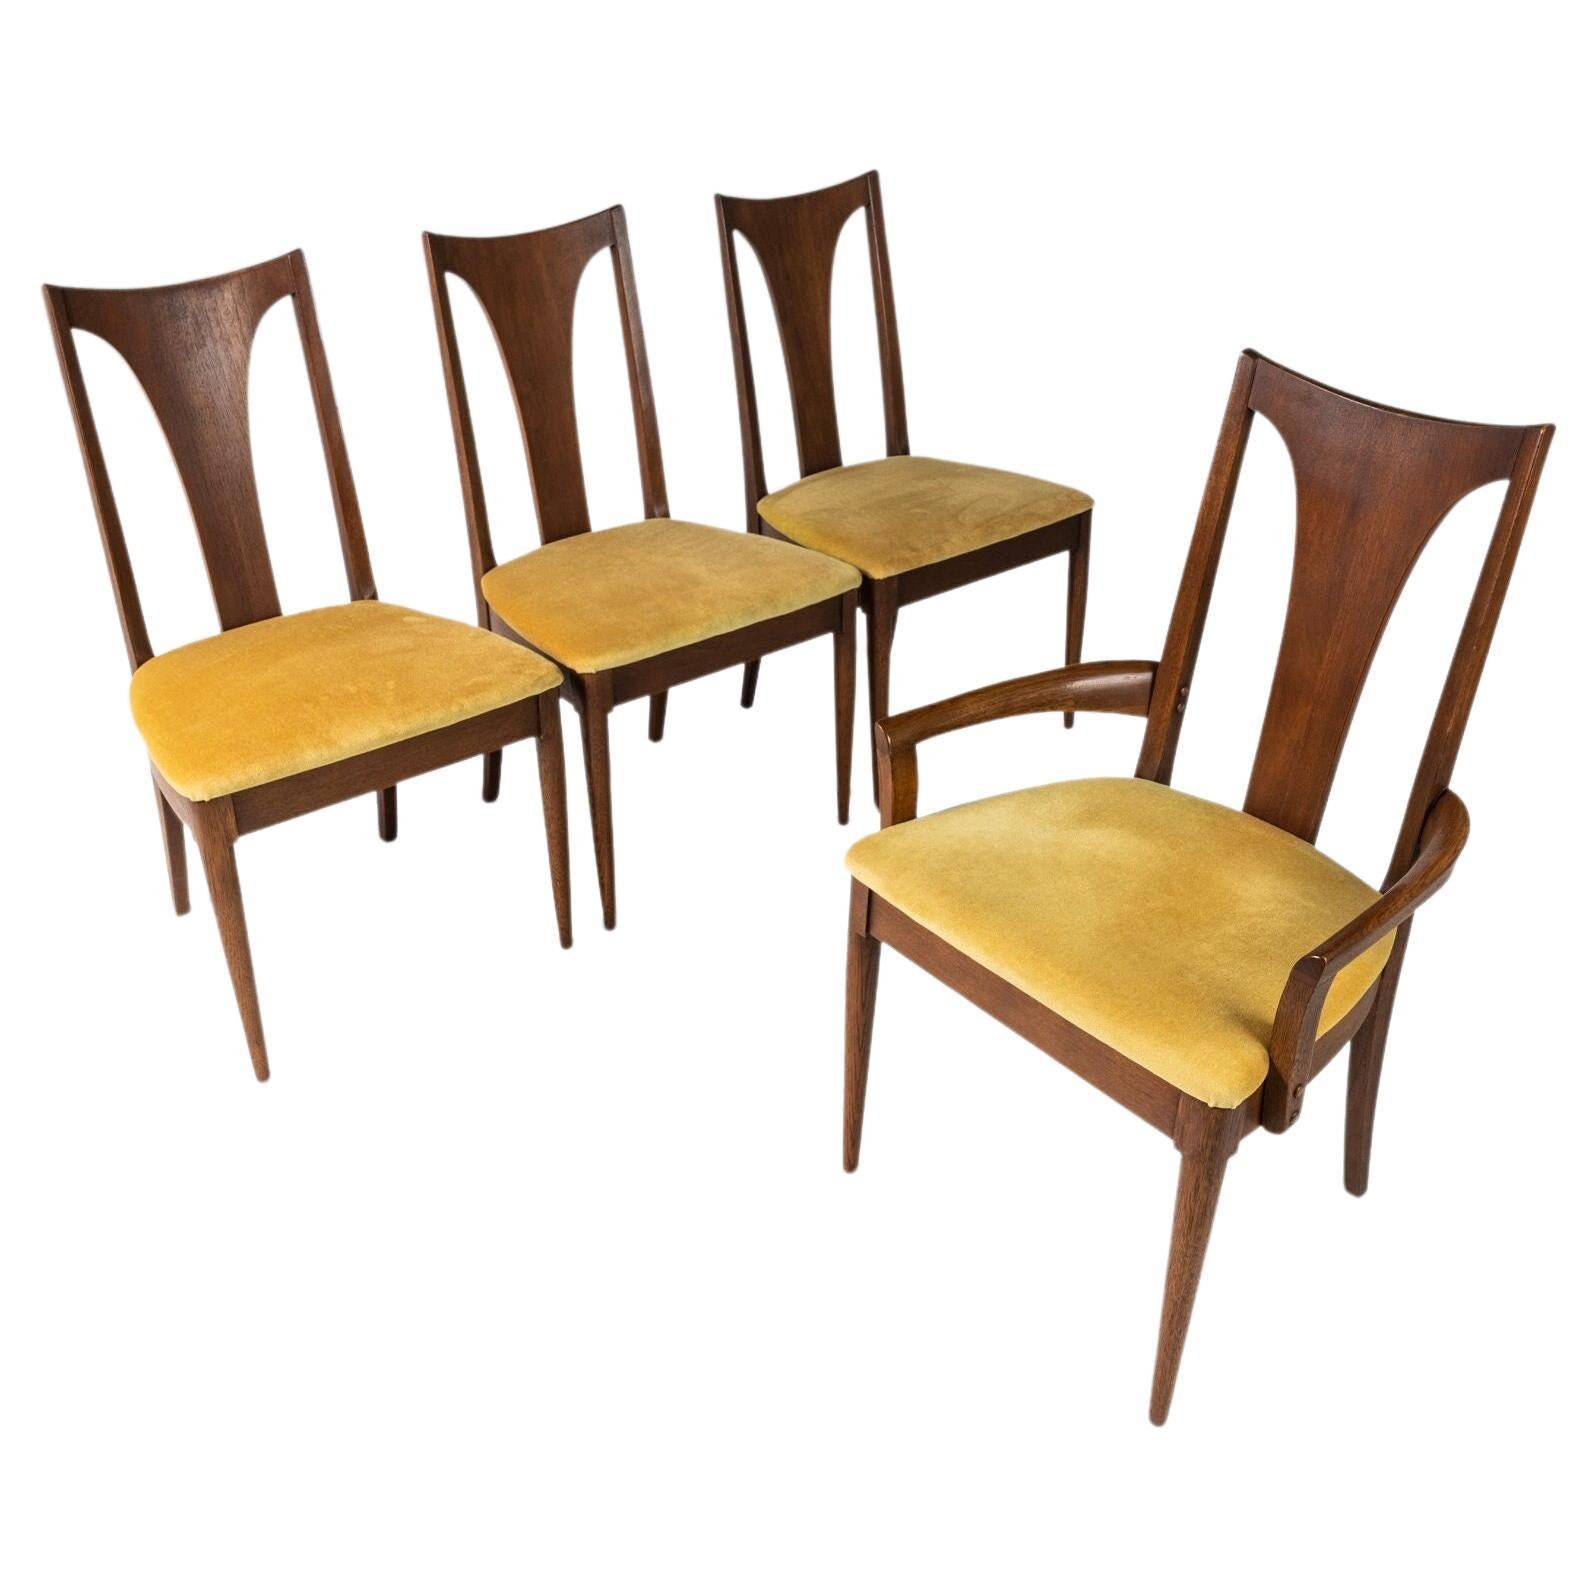 Set of Four (4) Mid Century Modern Brasilia Dining Chairs in Walnut by Broyhill